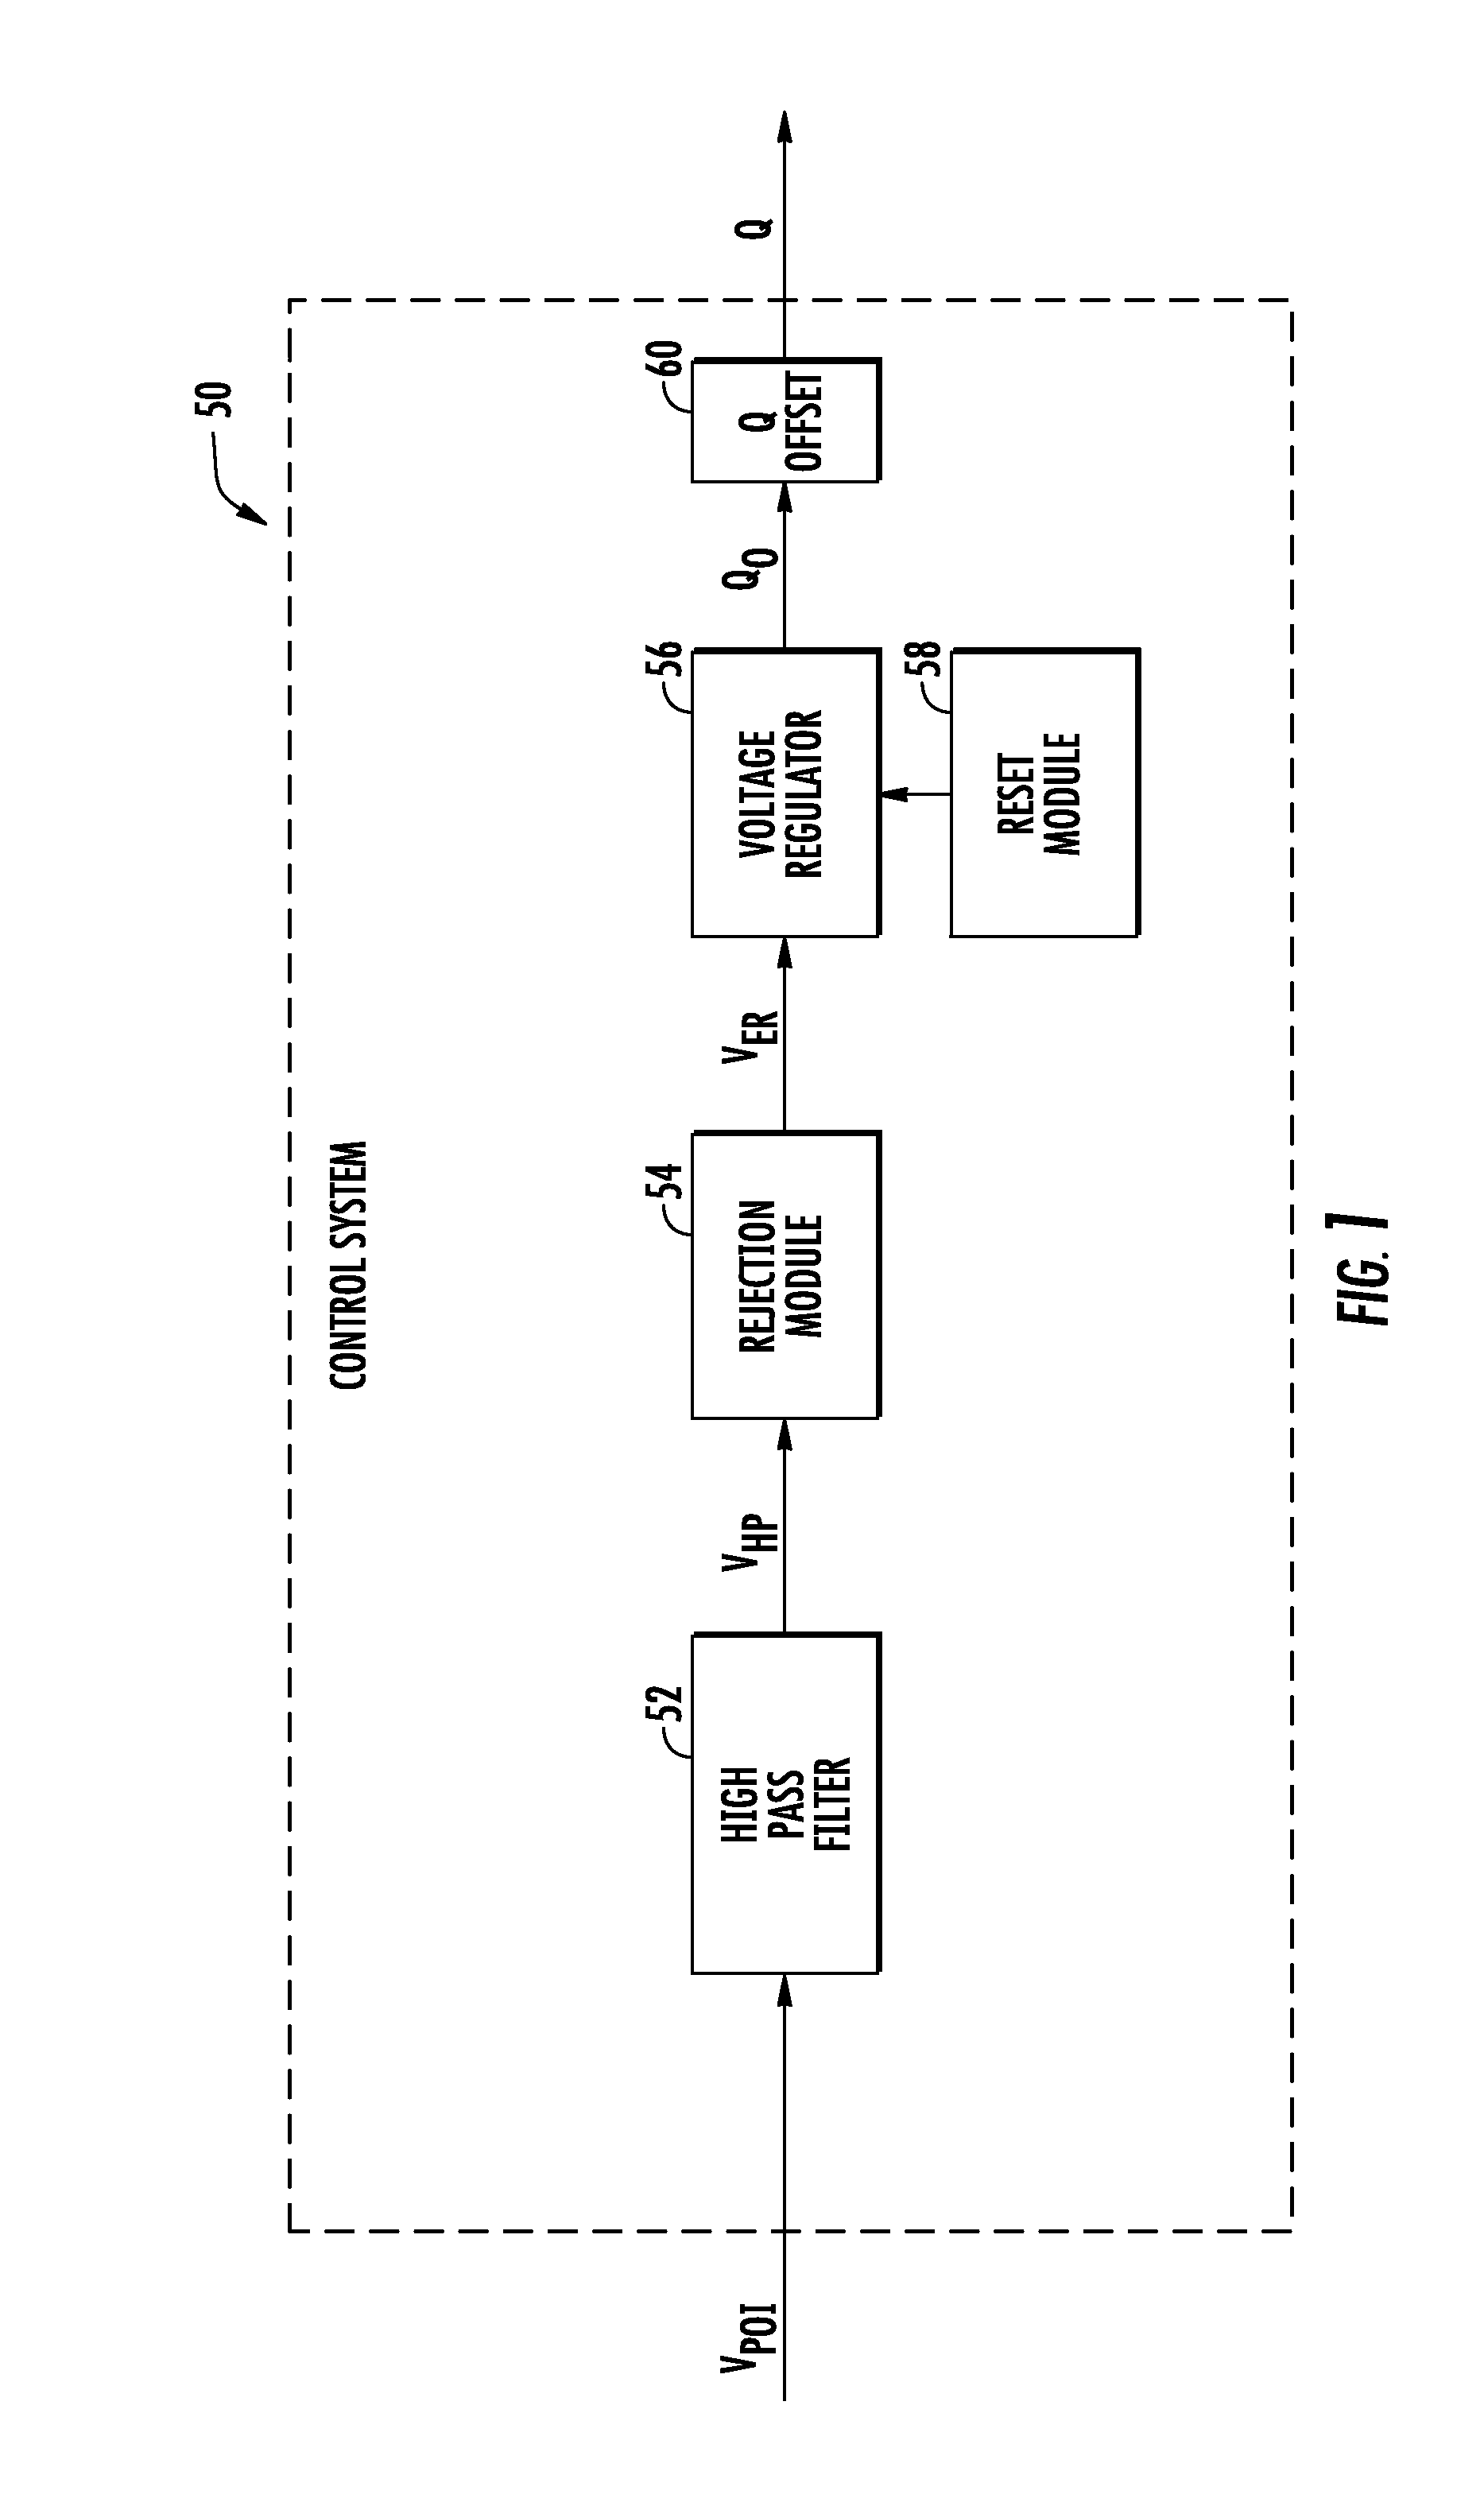 System and method for voltage regulation of a renewable energy plant